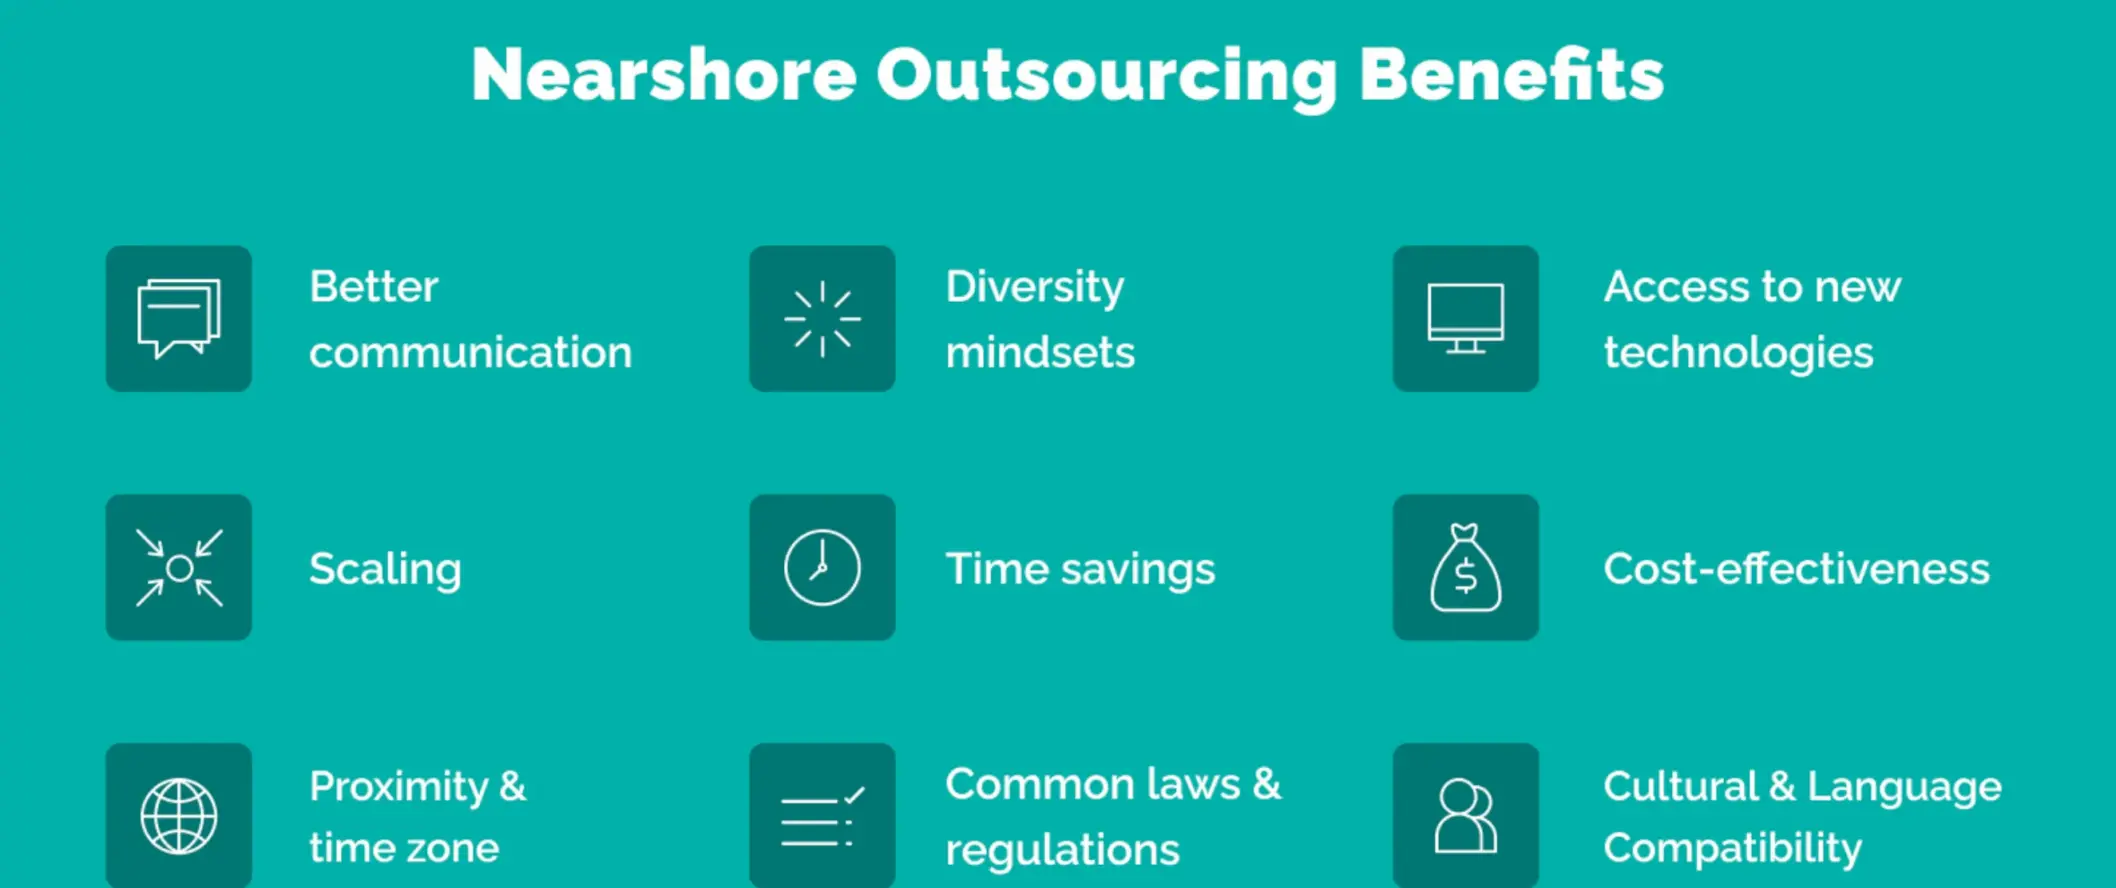 Nearshore outsourcing